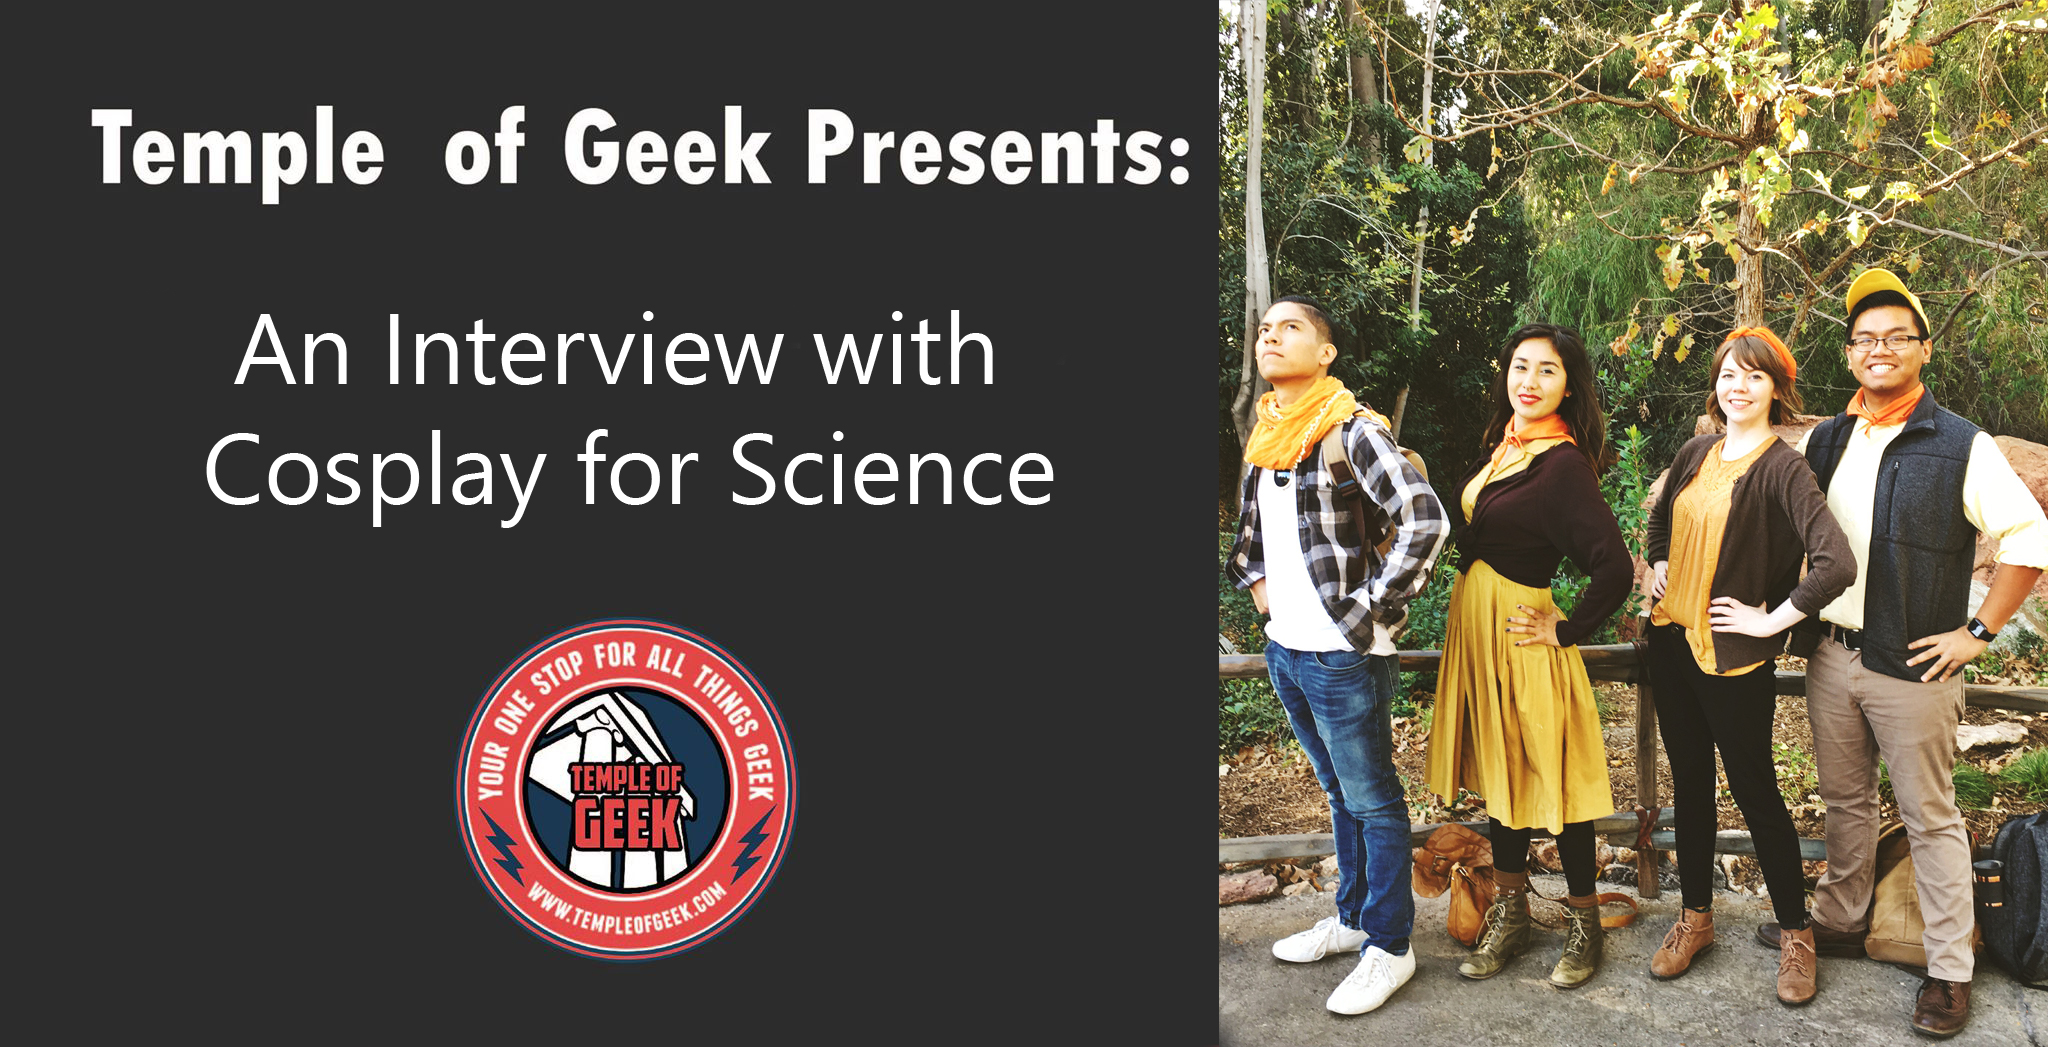 COSPLAY FRIDAY: An Interview with Cosplay for Science